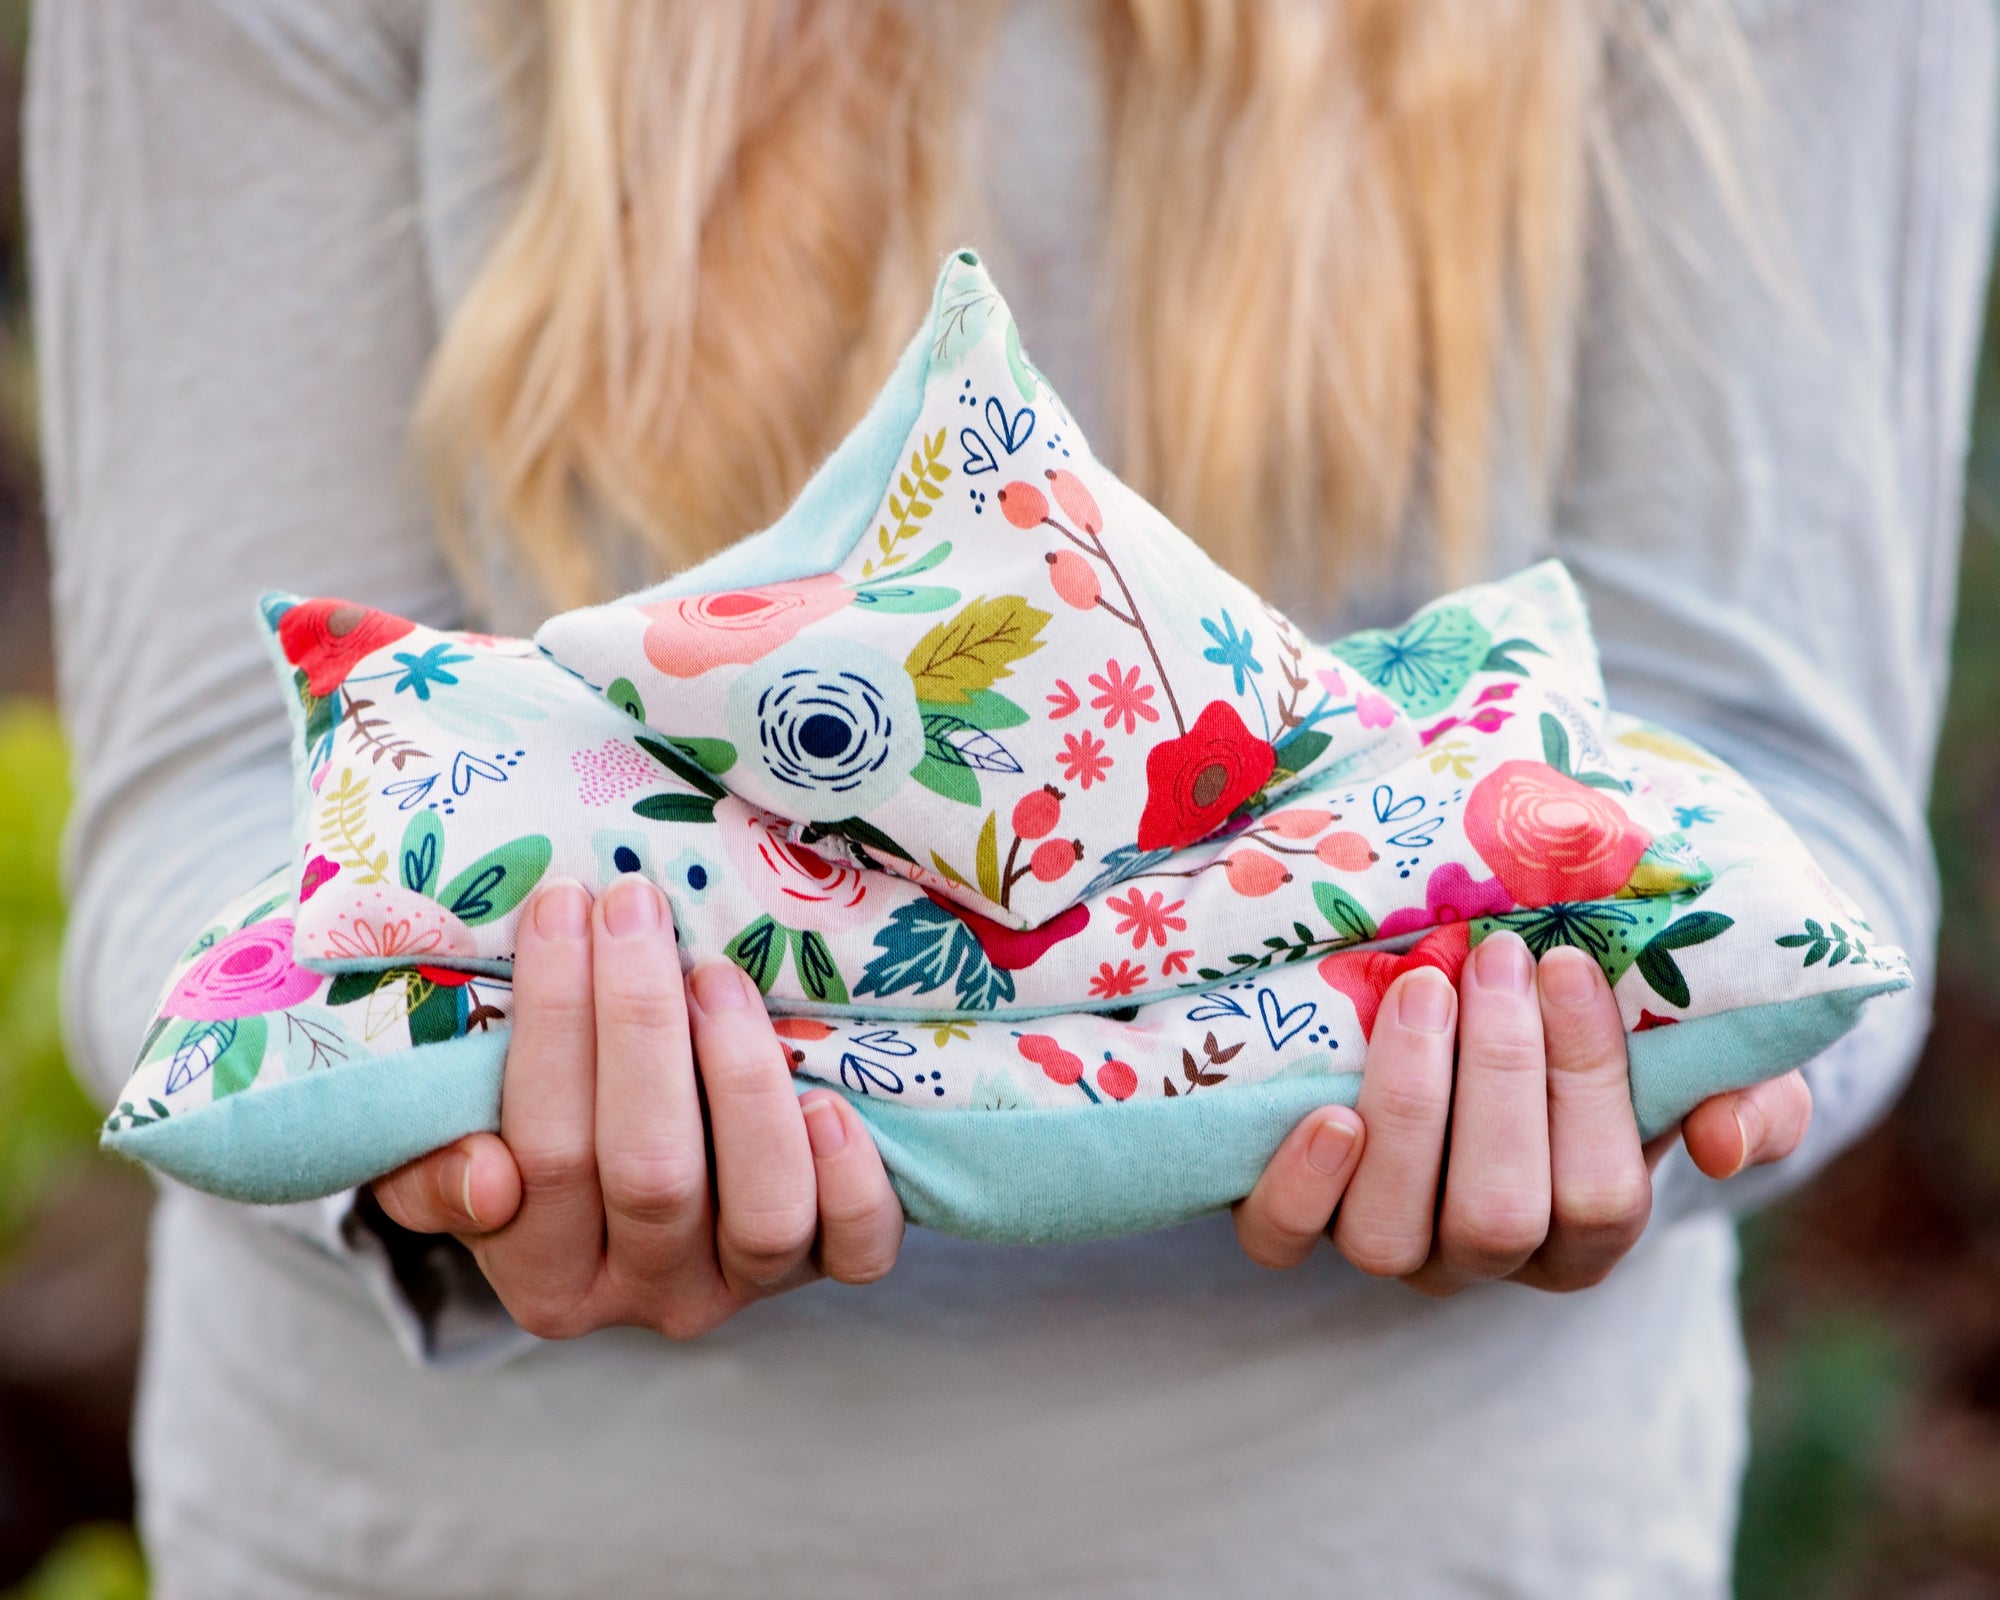 Girl holding microwave heating pads and or ice packs in her hands.